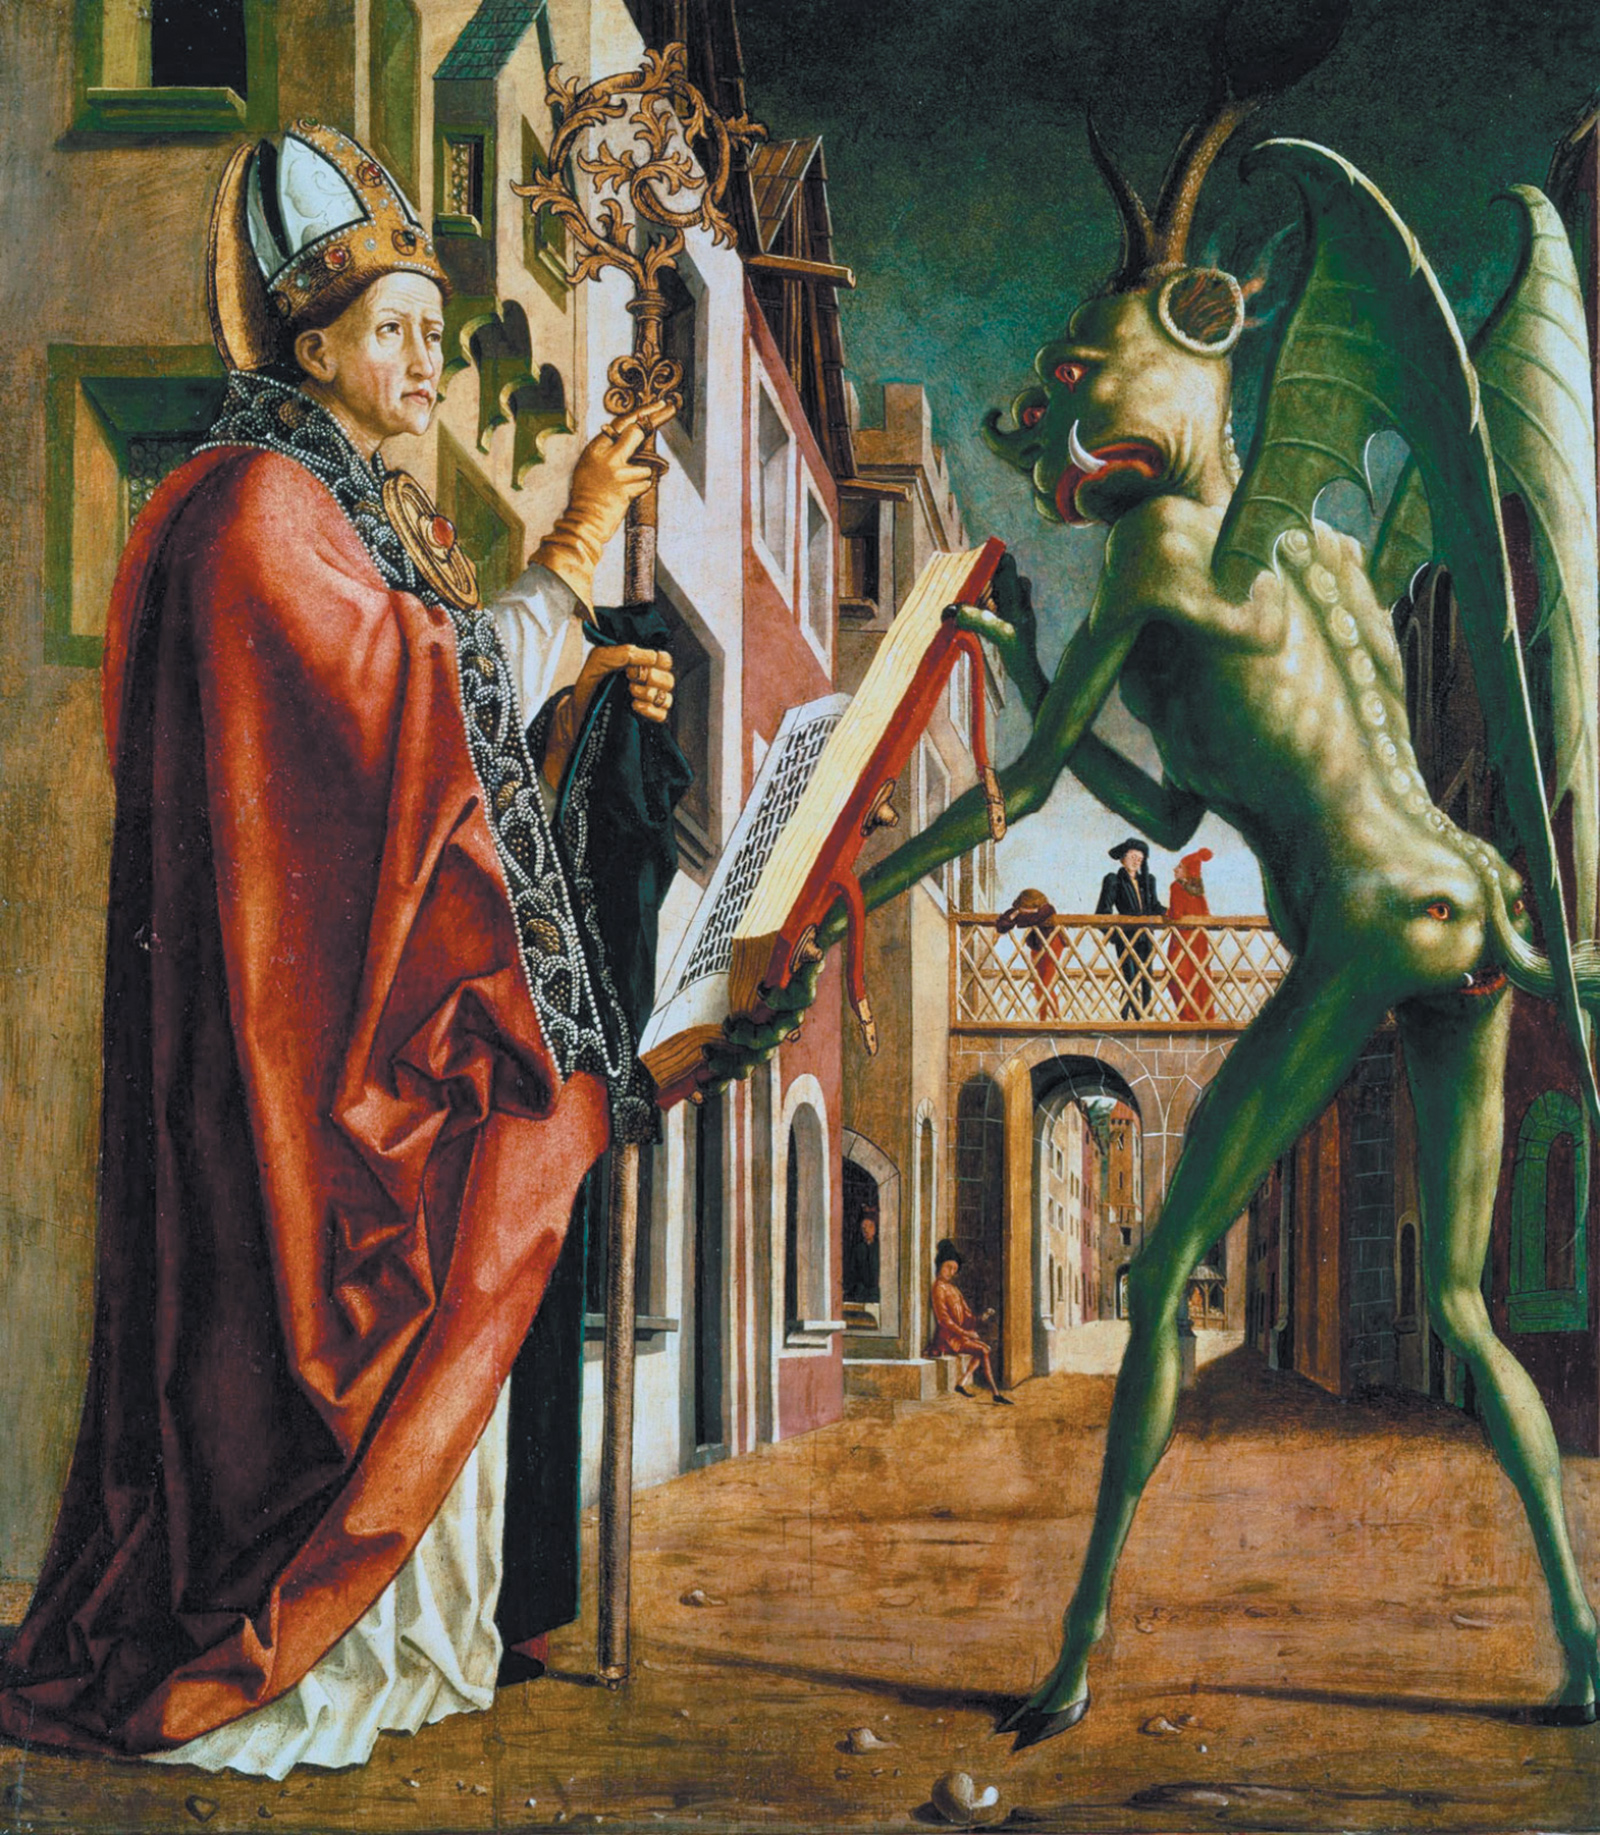 ‘The Devil Presenting Saint Augustine with the Book of Vices’; painting by Michael Pacher, fifteenth century